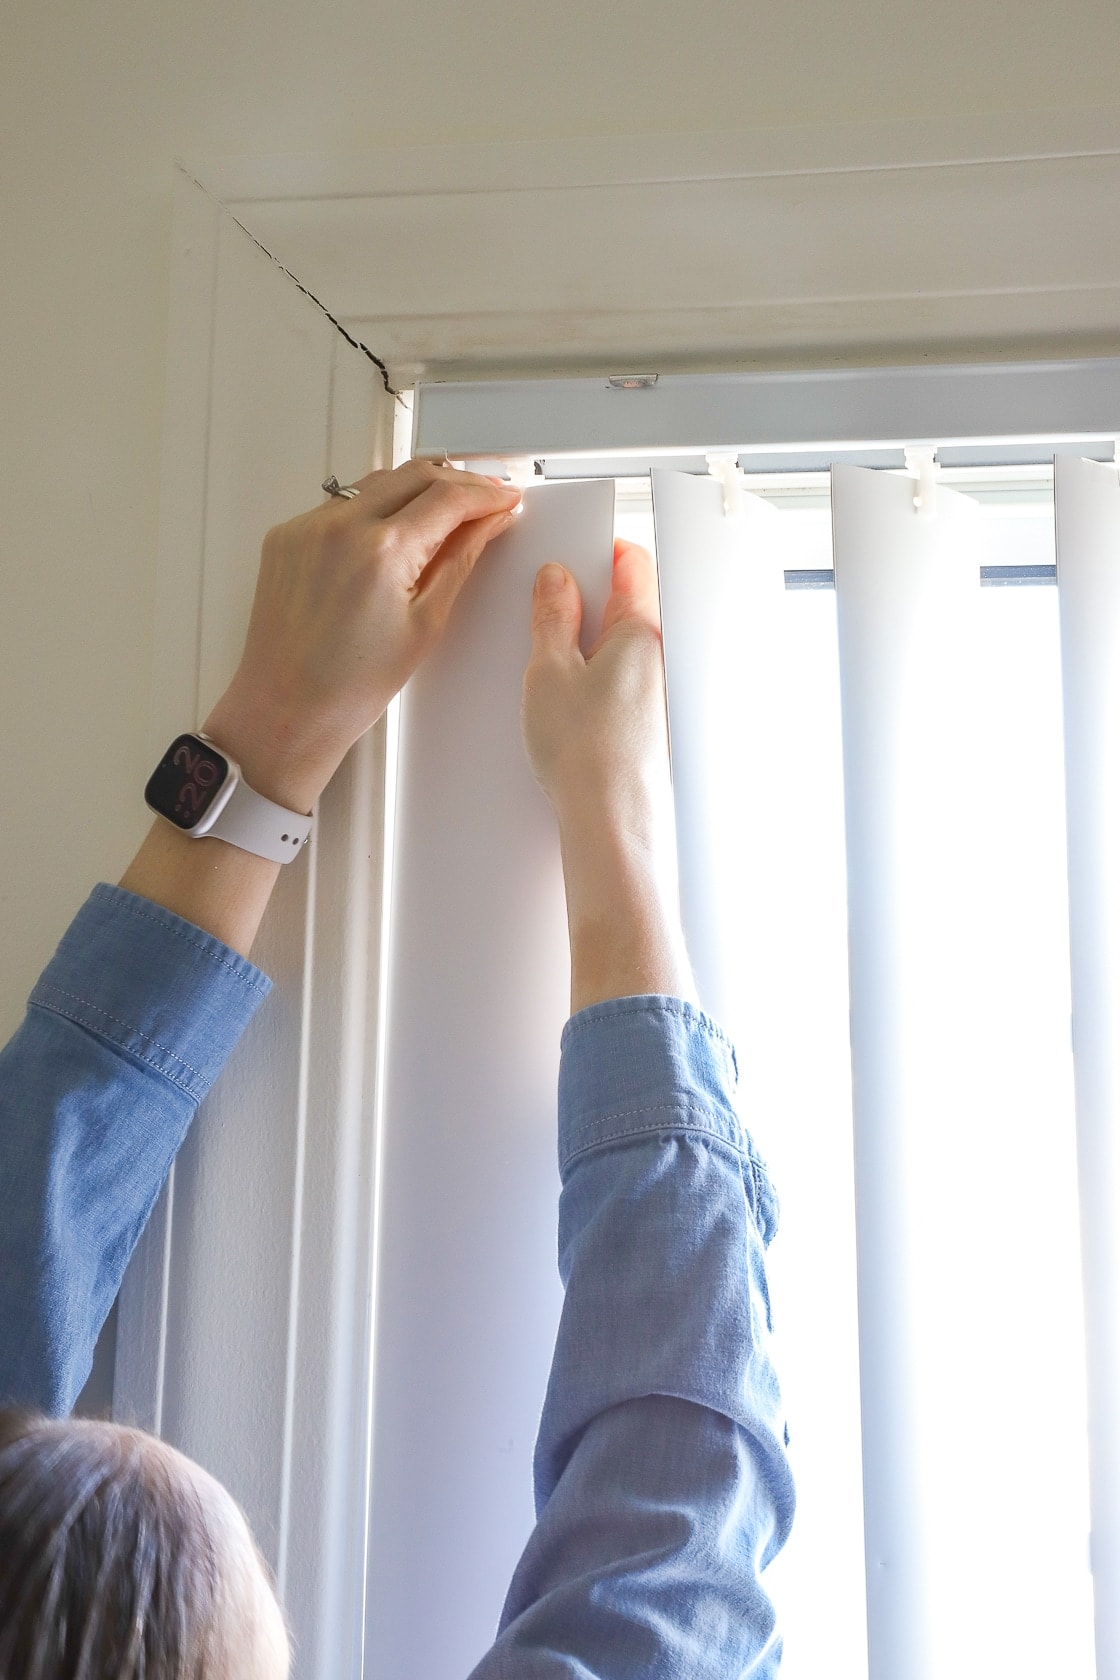 Hang trash bags on a curtain rod in the garage for easier access